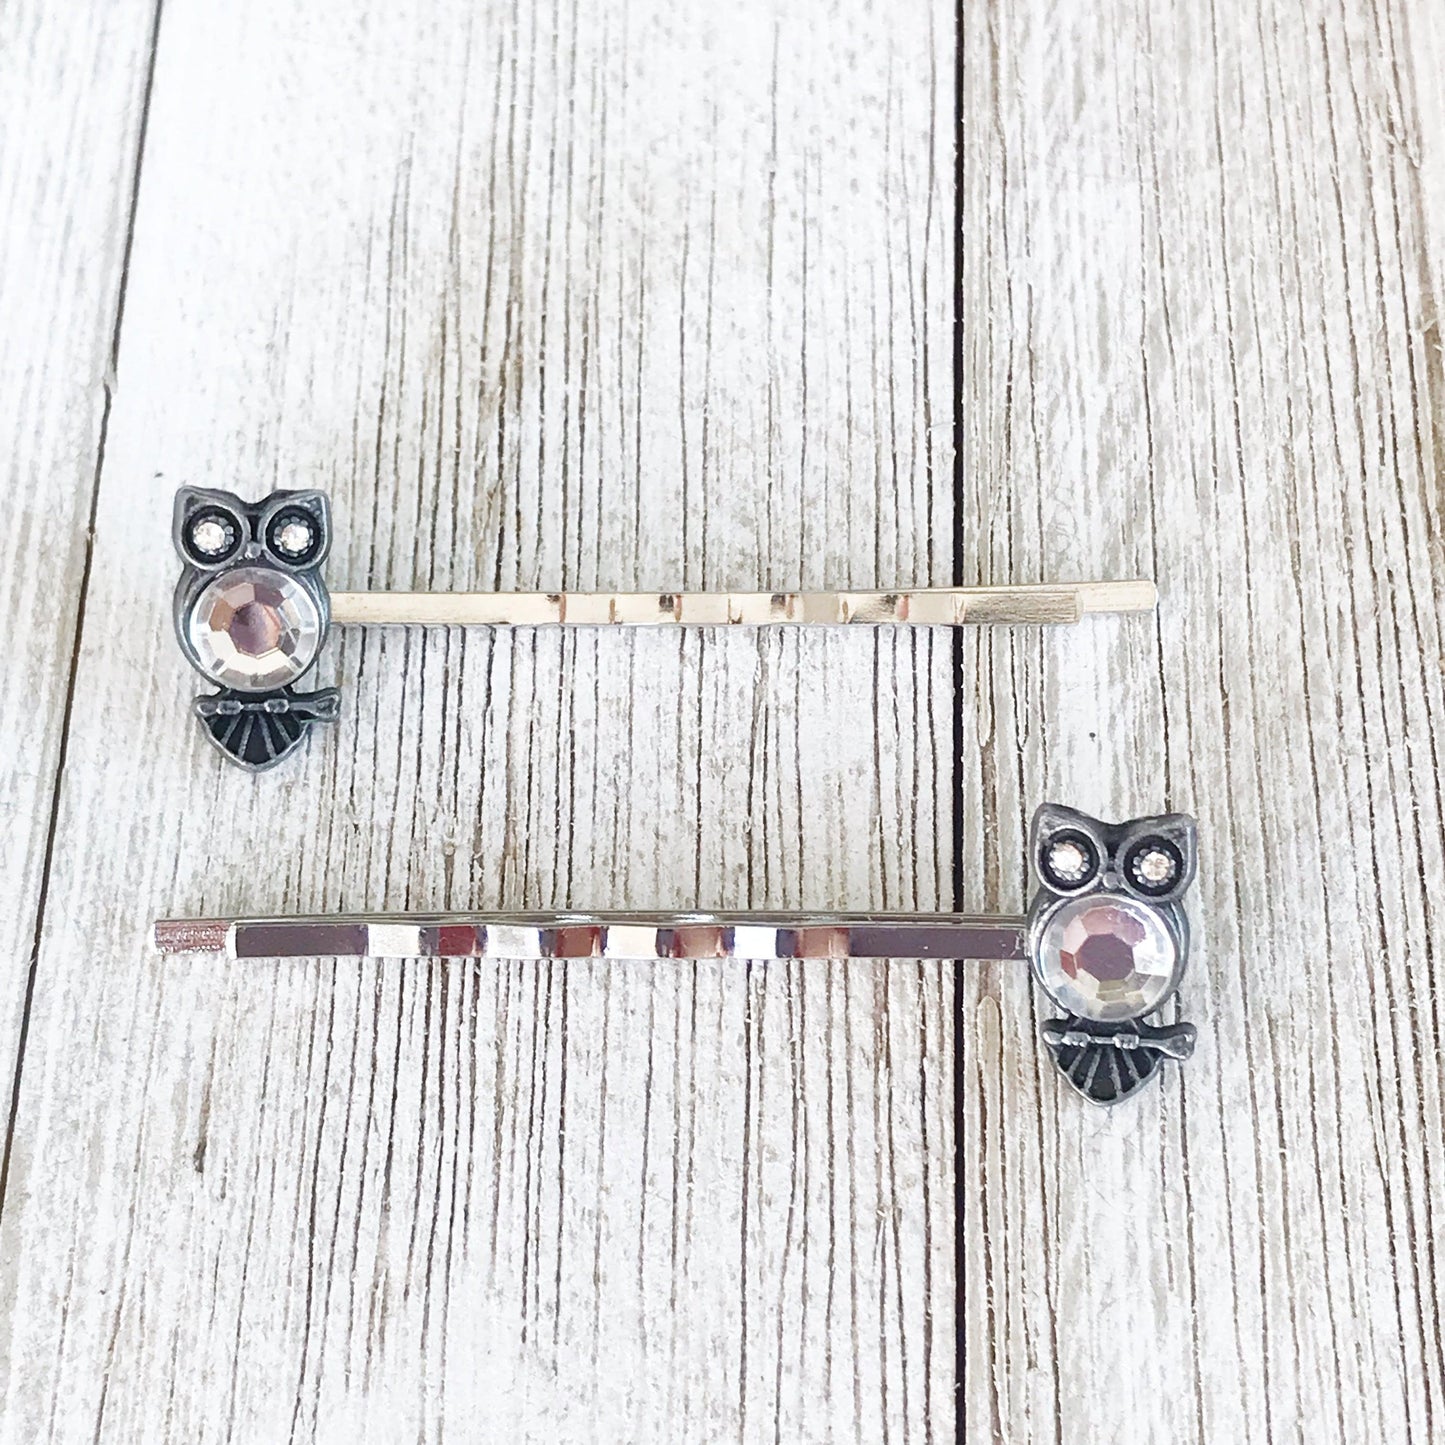 Clear Rhinestone Owl Hair Pins - Sparkling Owl-Inspired Accessories